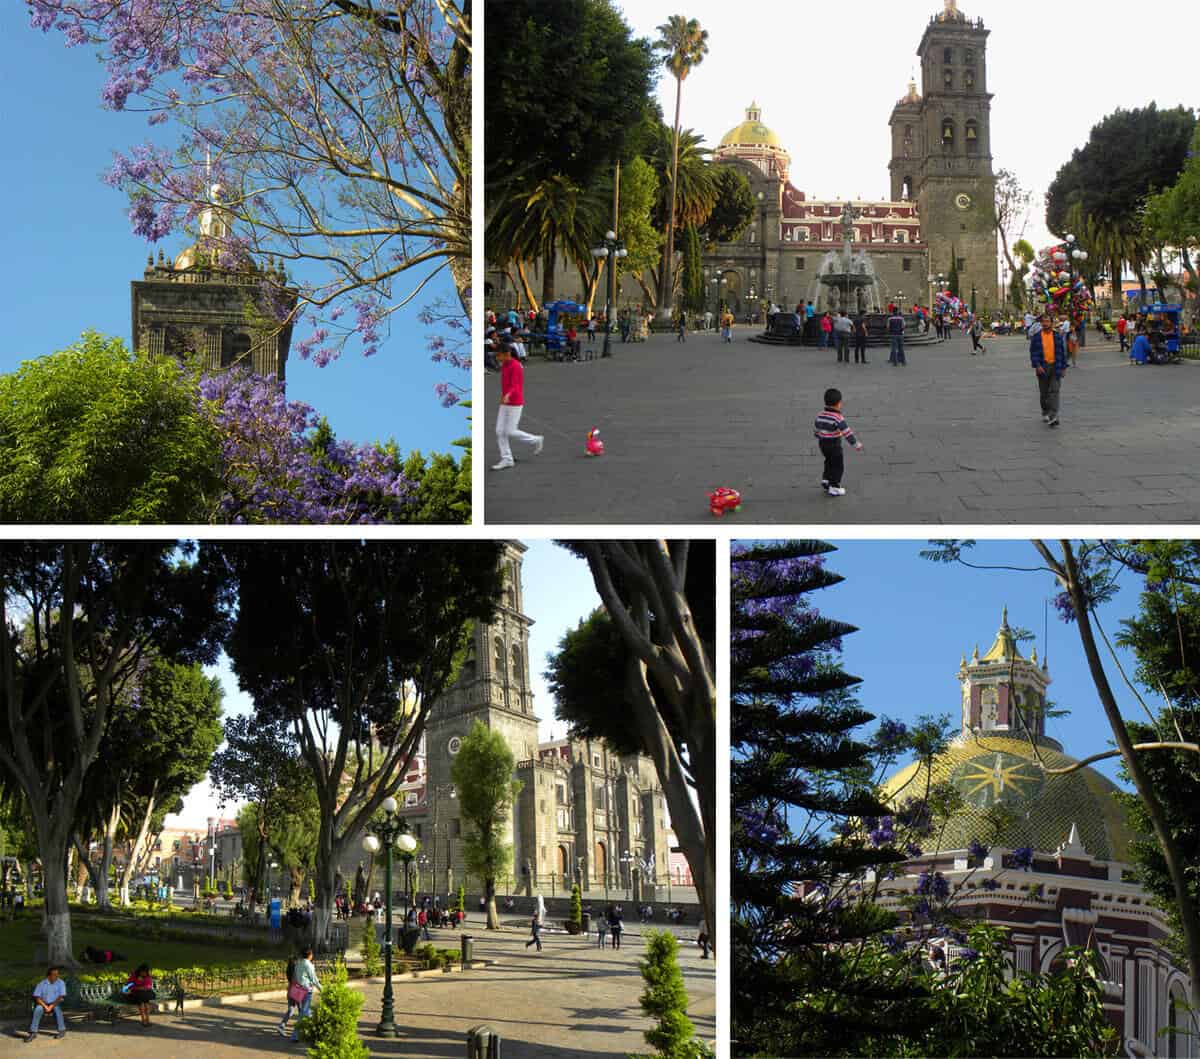 The Zócalo (main plaza) in Puebla Mexico. 7 things to See and Do in surprising Puebla